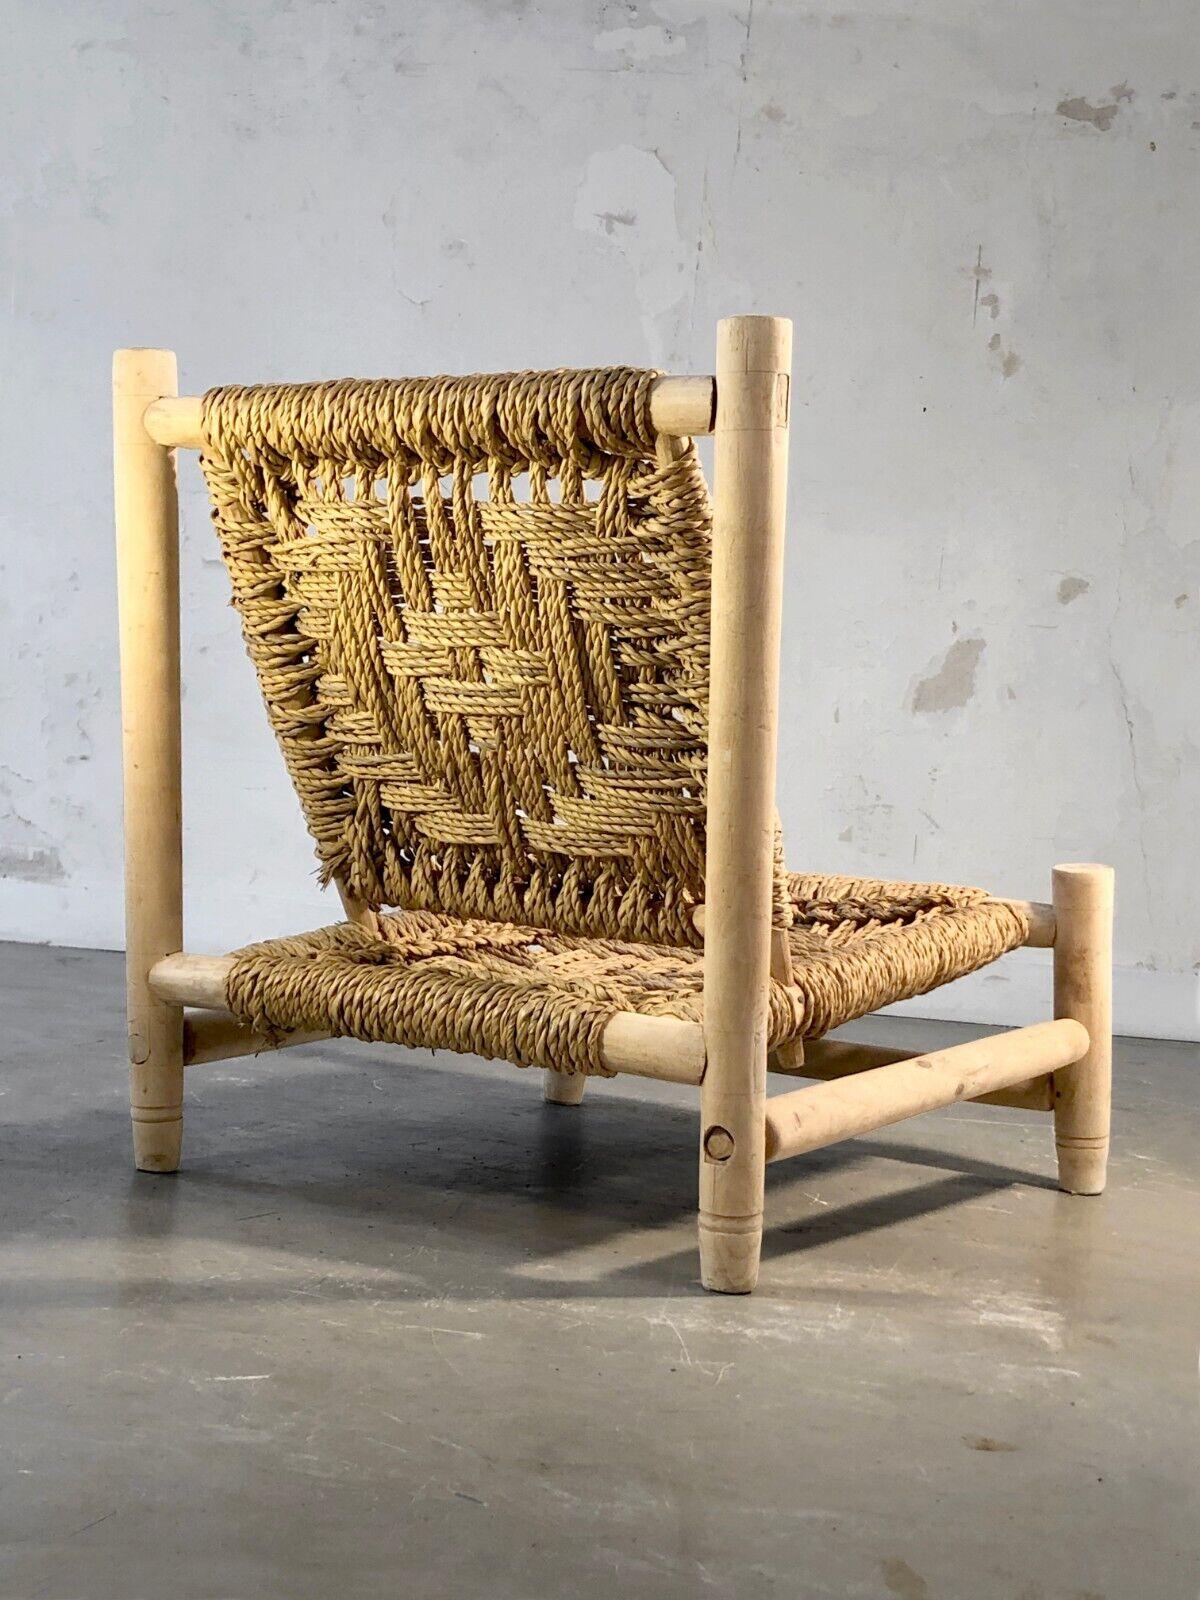 Rope A RUSTIC-MODERN BRUTALIST ARMCHAIR by Adrien AUDOUX & Frida MINNET, France 1950 For Sale